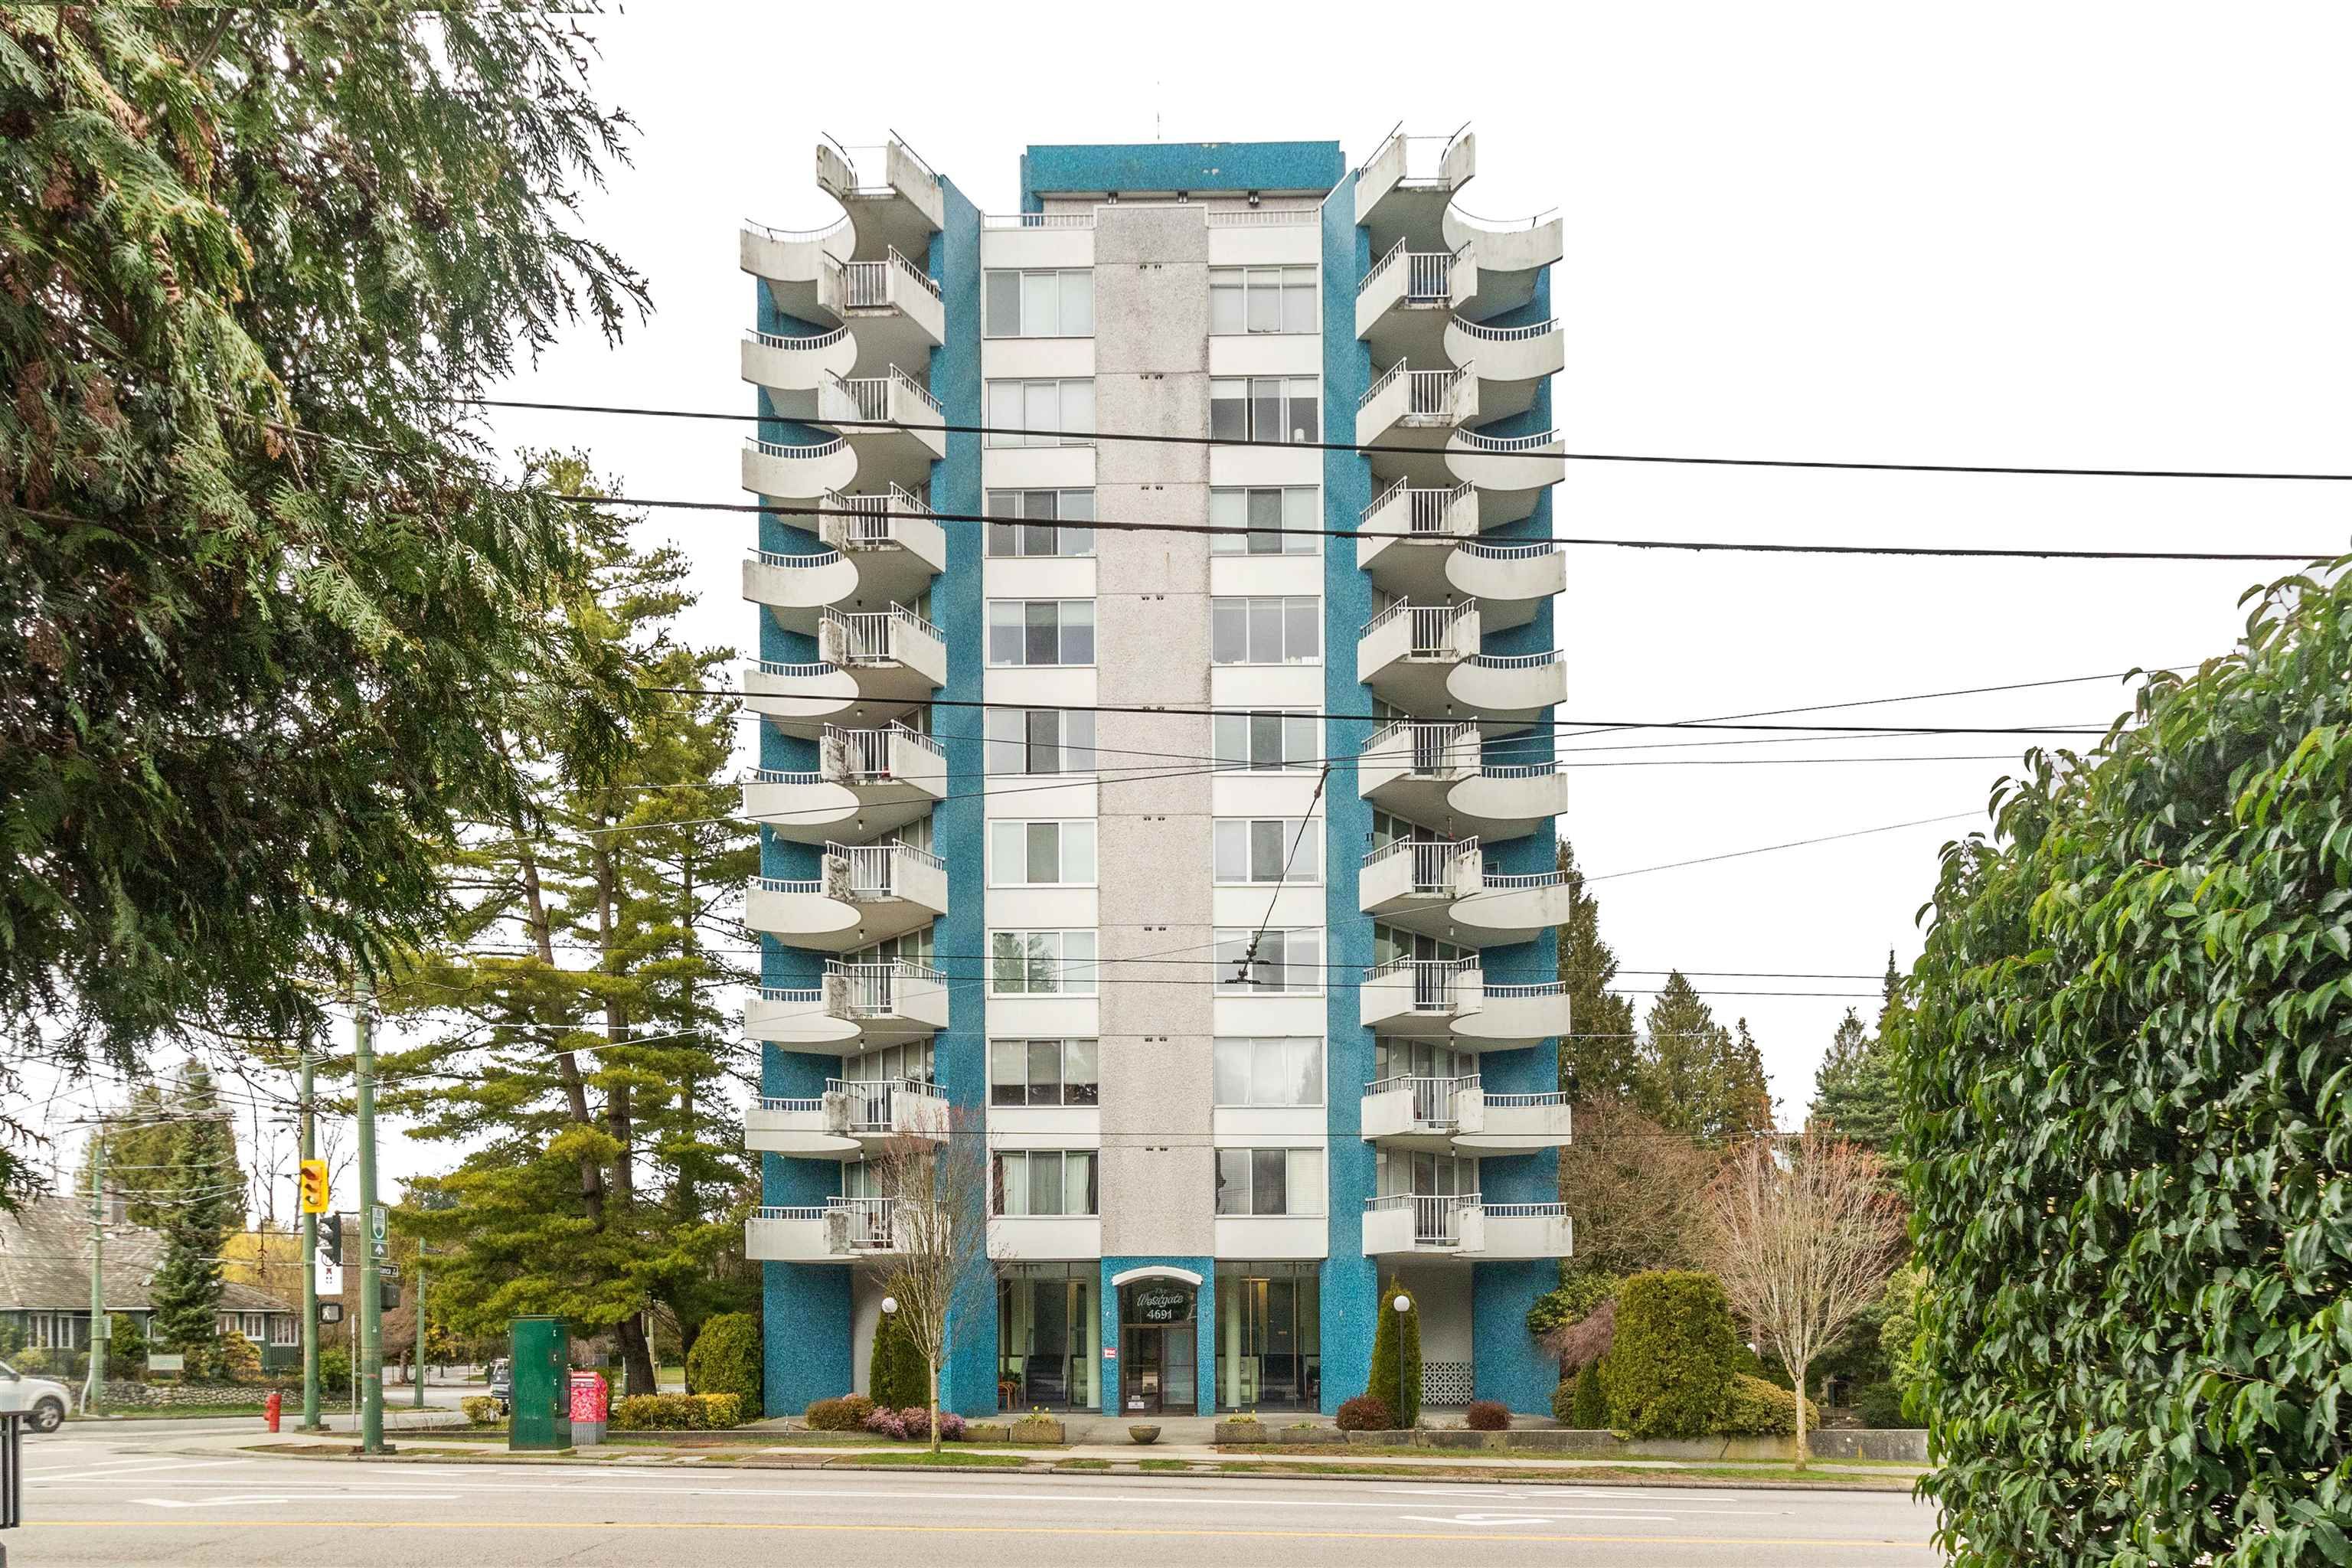 New property listed in Point Grey, Vancouver West